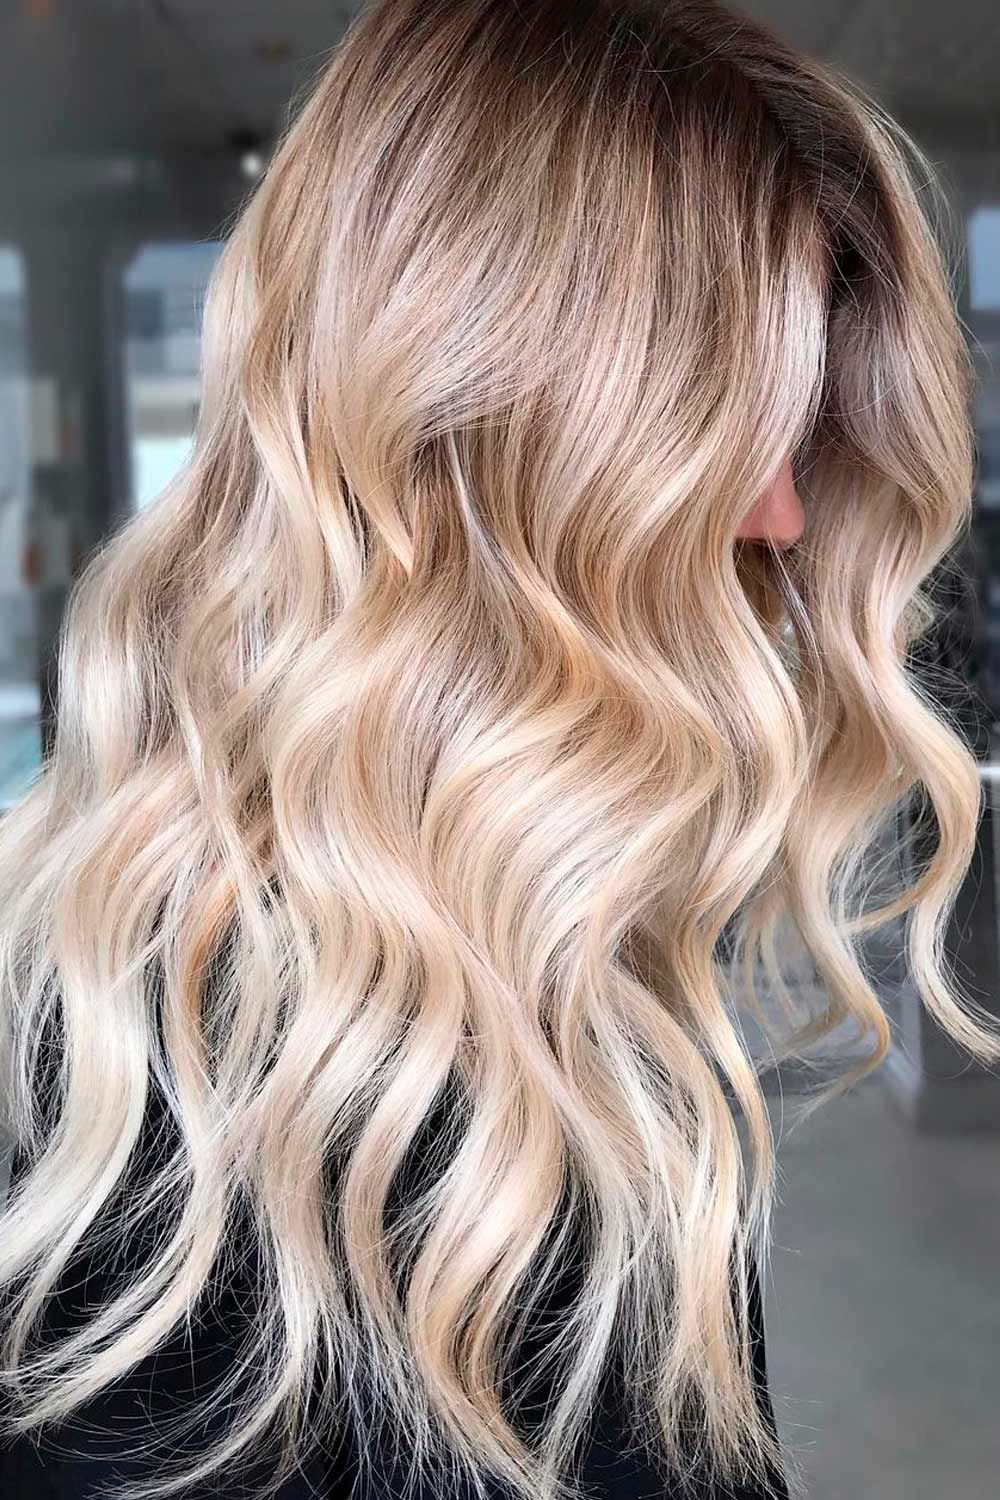 Curly Highlighted